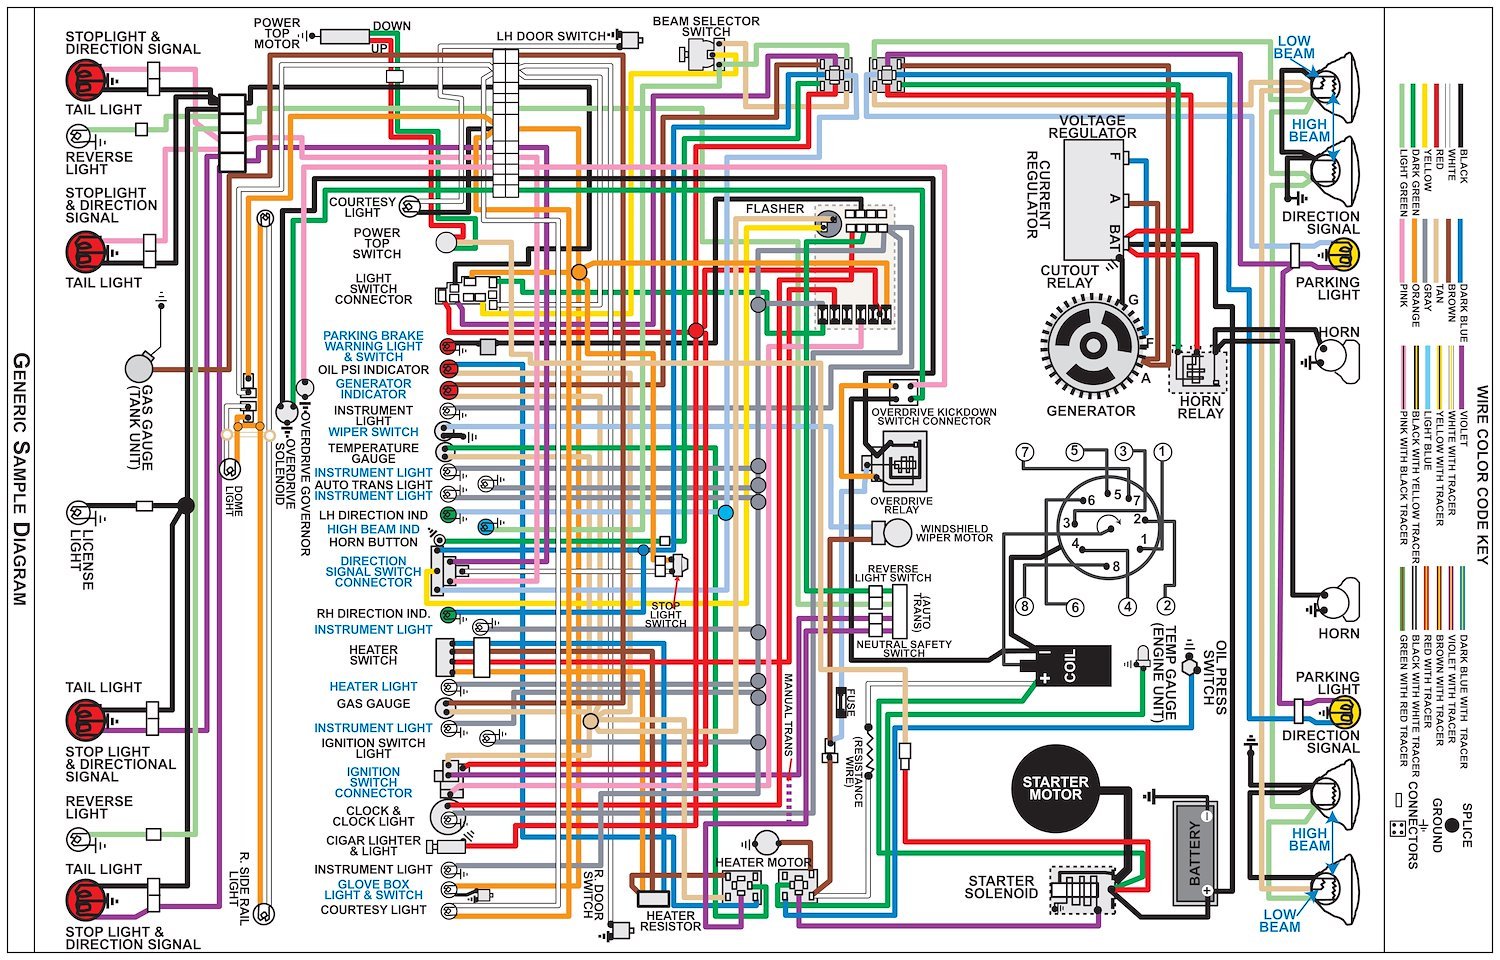 Wiring Diagram for 1968 Ford Galaxie, 11 in x 17 in., Laminated